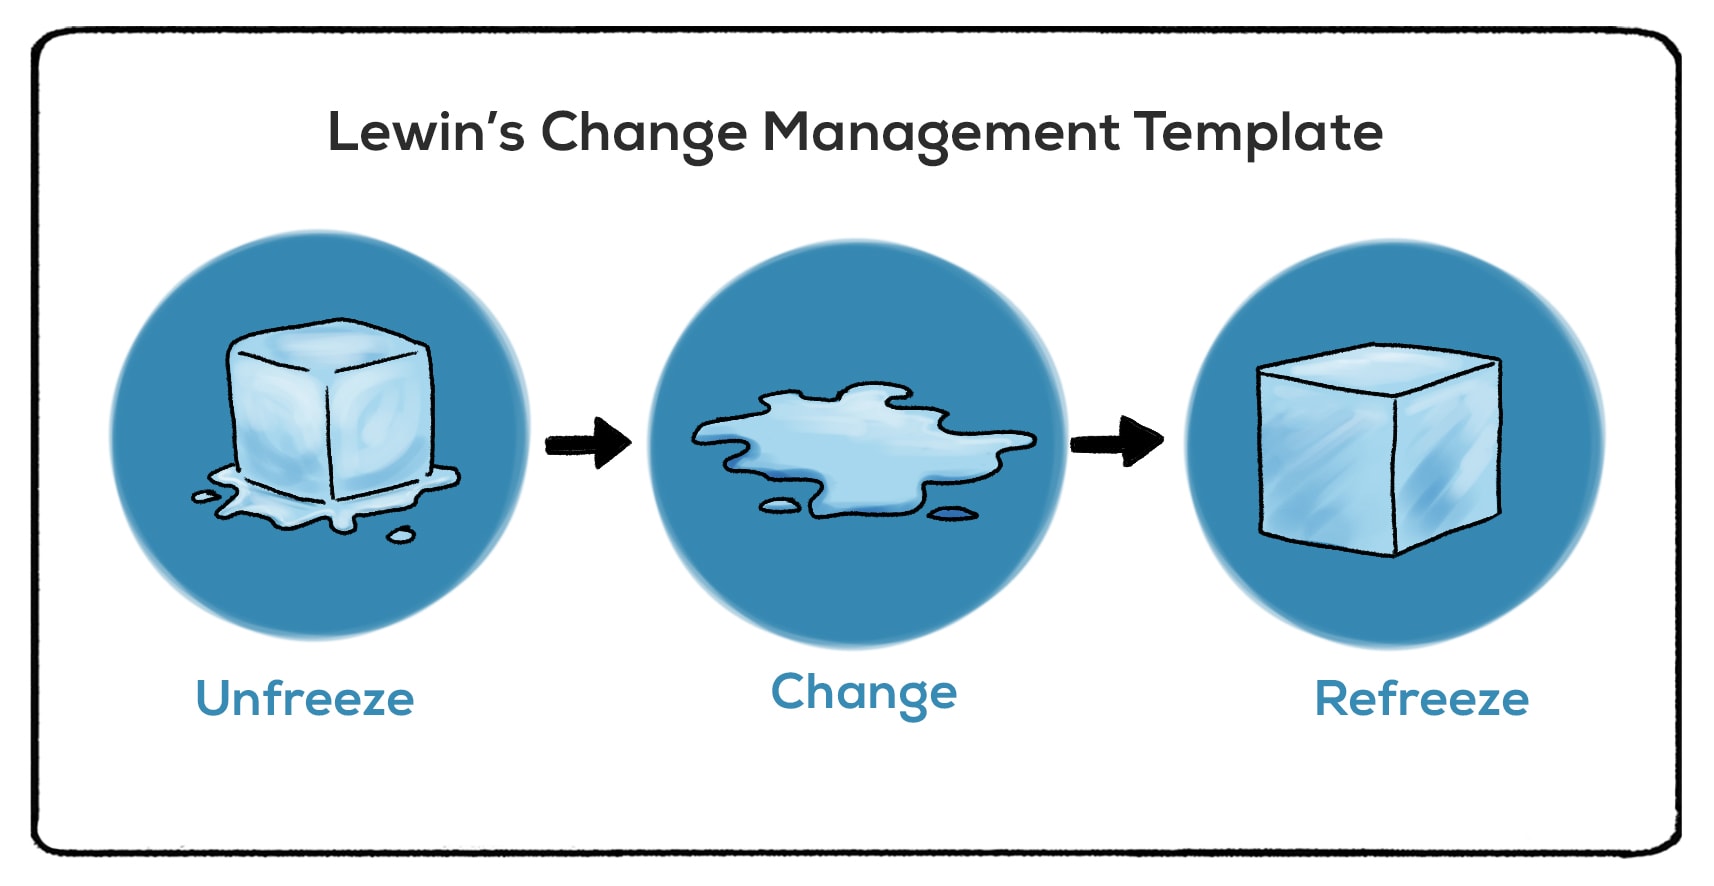 lewin's change management theory